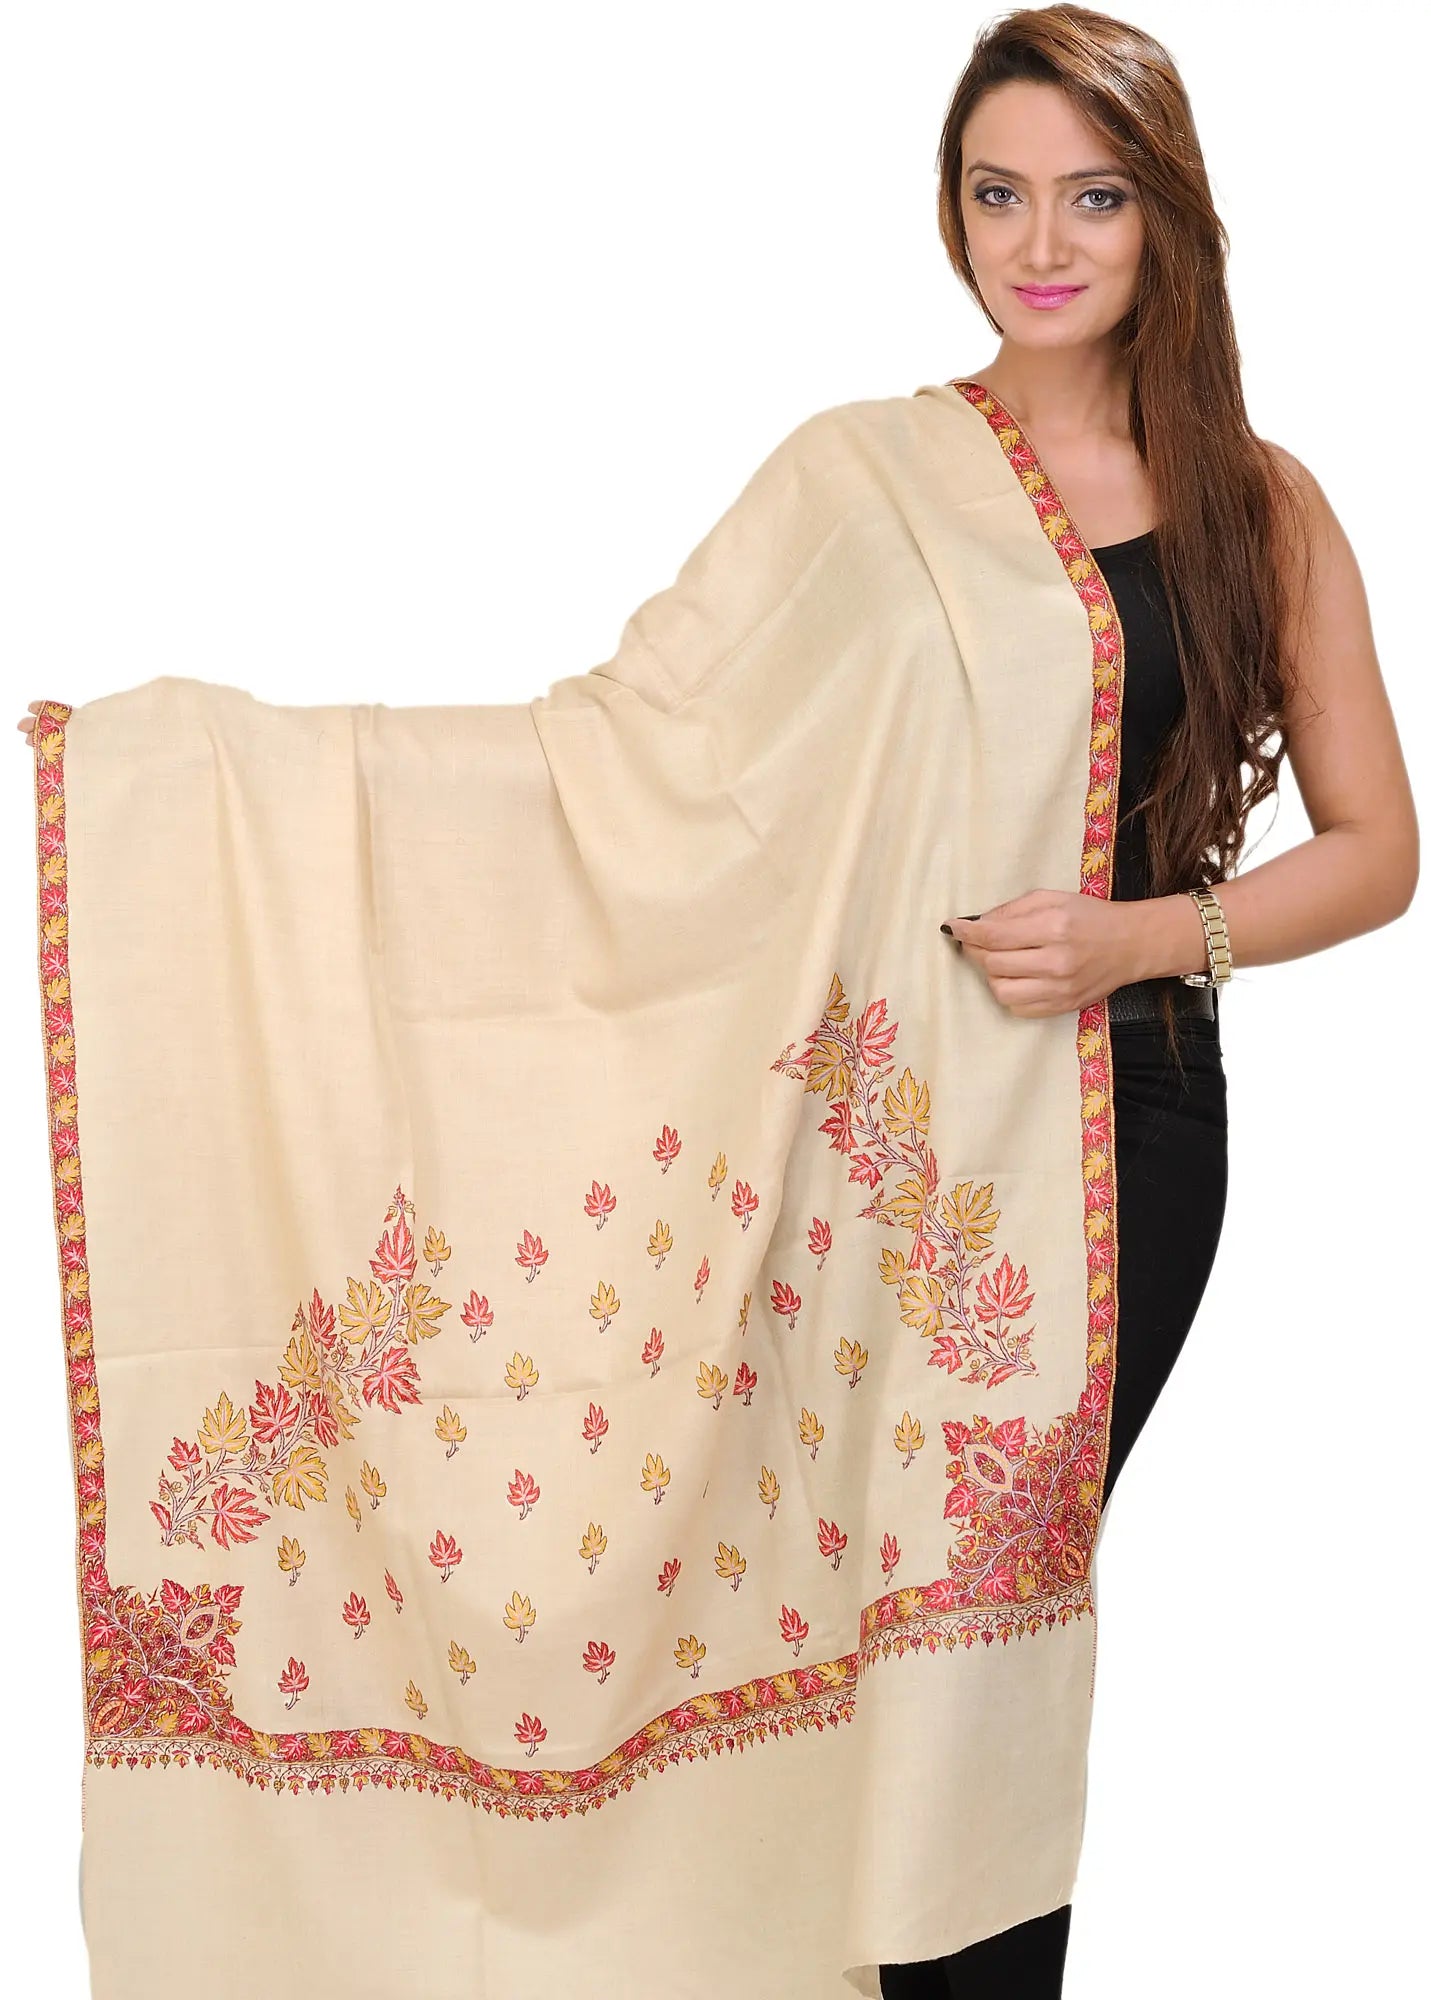 Almond-Buff Pashmina Shawl from Kashmir with Hand Embroidered Maple Leaves